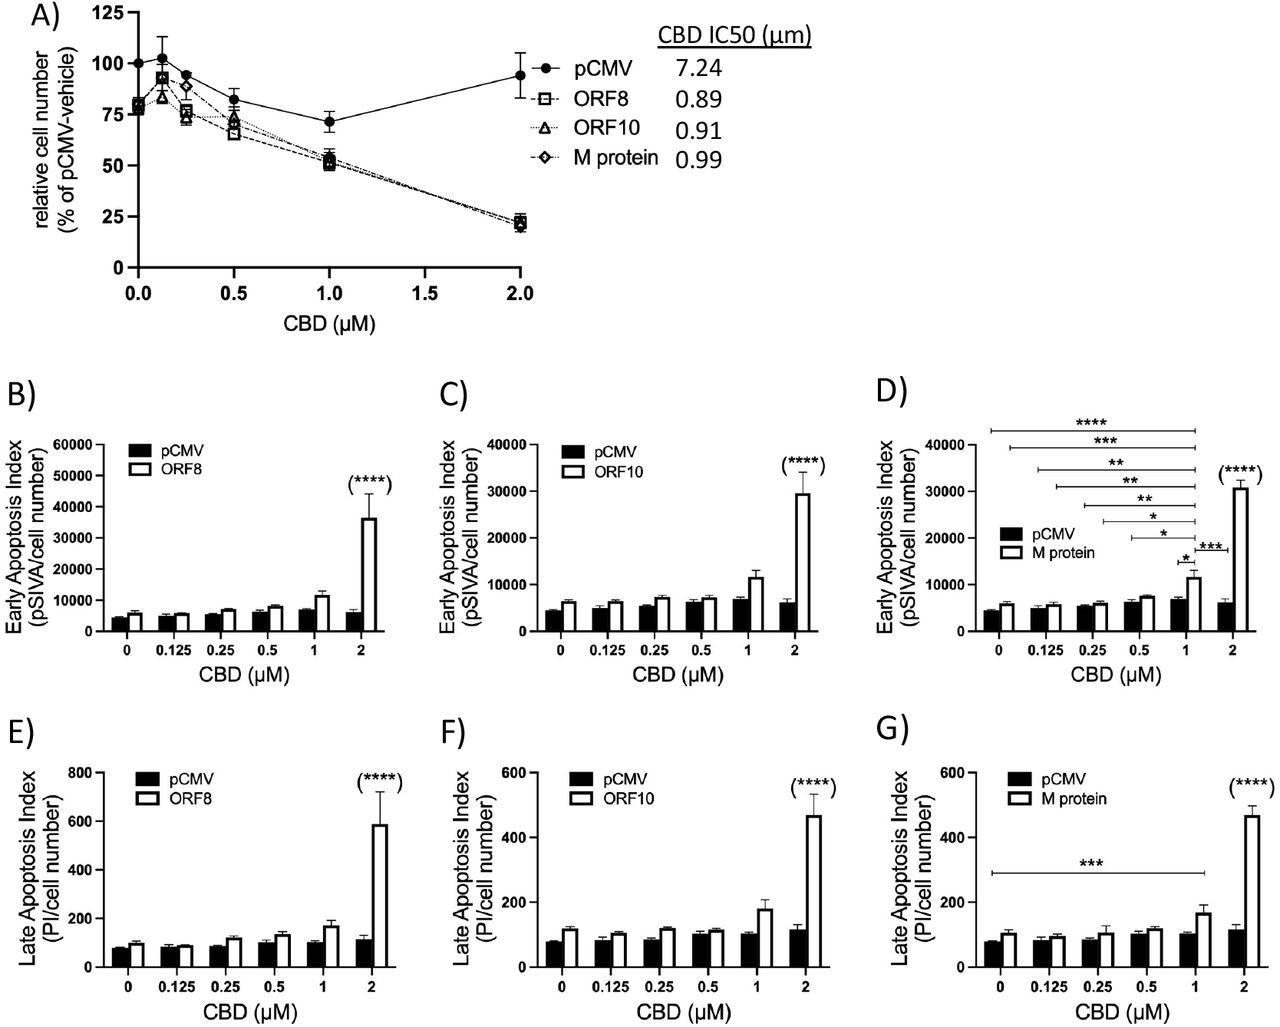 Effect of ORF8, ORF10 or M protein expression, with and without CBD treatment, on HEK293 cell count and apoptosis indices.  (A) Dose-dependent effects of CBD on the relative number of cells per well 24 h after transfection with a control plasmid (pCMV) or plasmids expressing ORF8, ORF10 or the M protein (n = 3-12).  IC50 values ​​for the concentration of CBD in combination with each group are shown.  (BD) Dose-response effect of CBD on early apoptosis index in HEK293 cells expressing pCMV or viral genes at 24 h.  (EG) Dose-response effect of CBD on late apoptosis index in HEK293 cells transfected with control or viral plasmids.  Apoptotic indices were calculated by dividing the relative uptake of the respective marker by the number of cells per well.  Apoptosis data were analyzed by 2-way ANOVA with Tukey's post-hoc test,